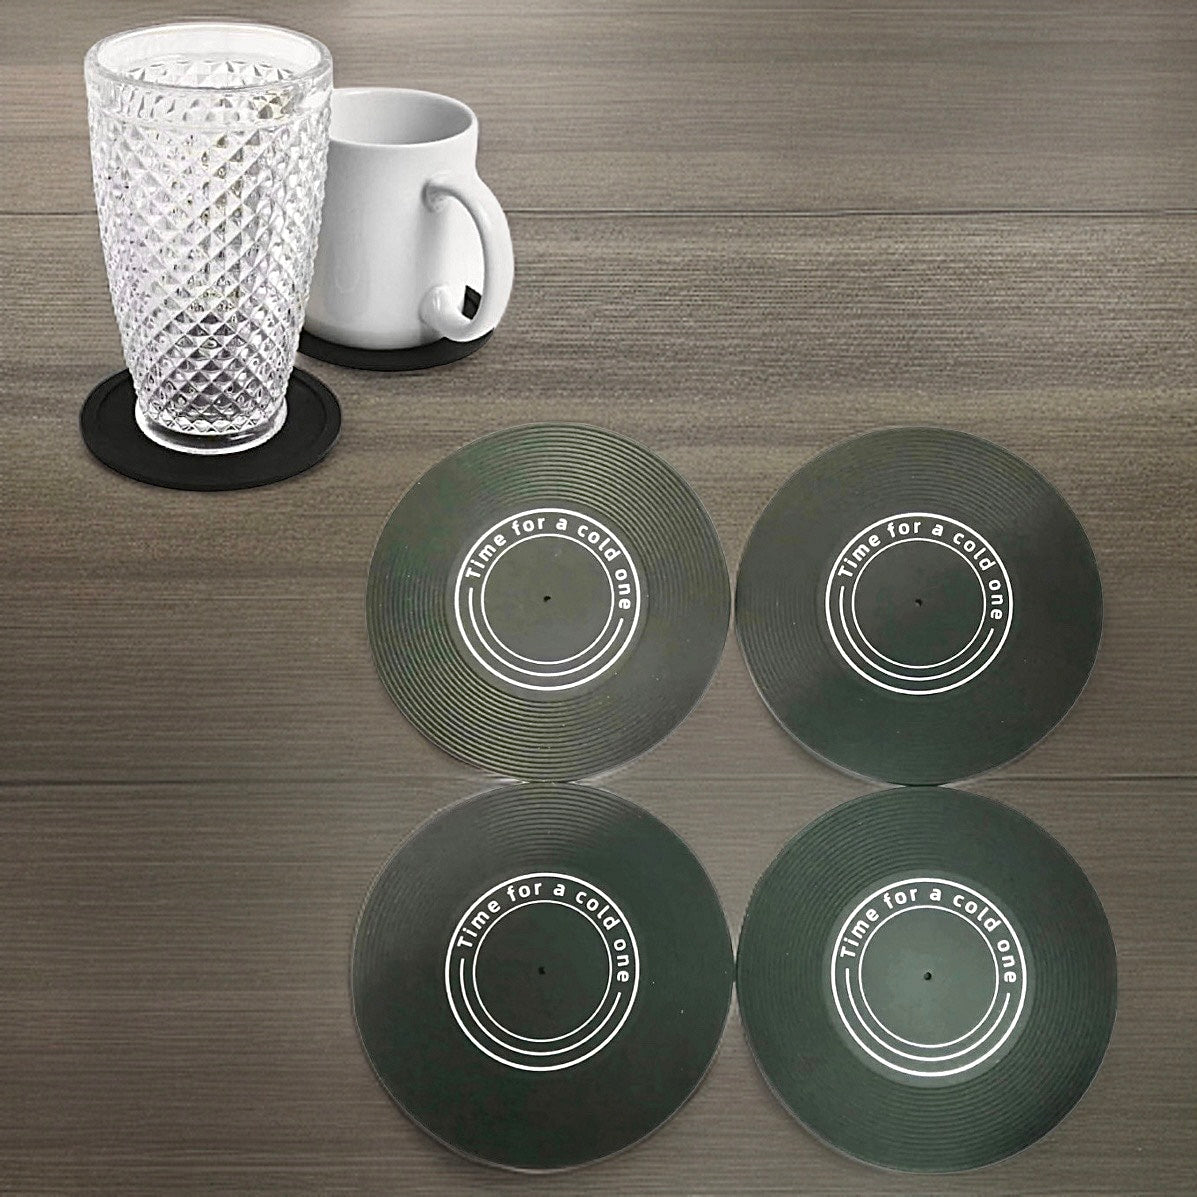 4 Piece Set “Time For A Cold One” Silicone Coasters